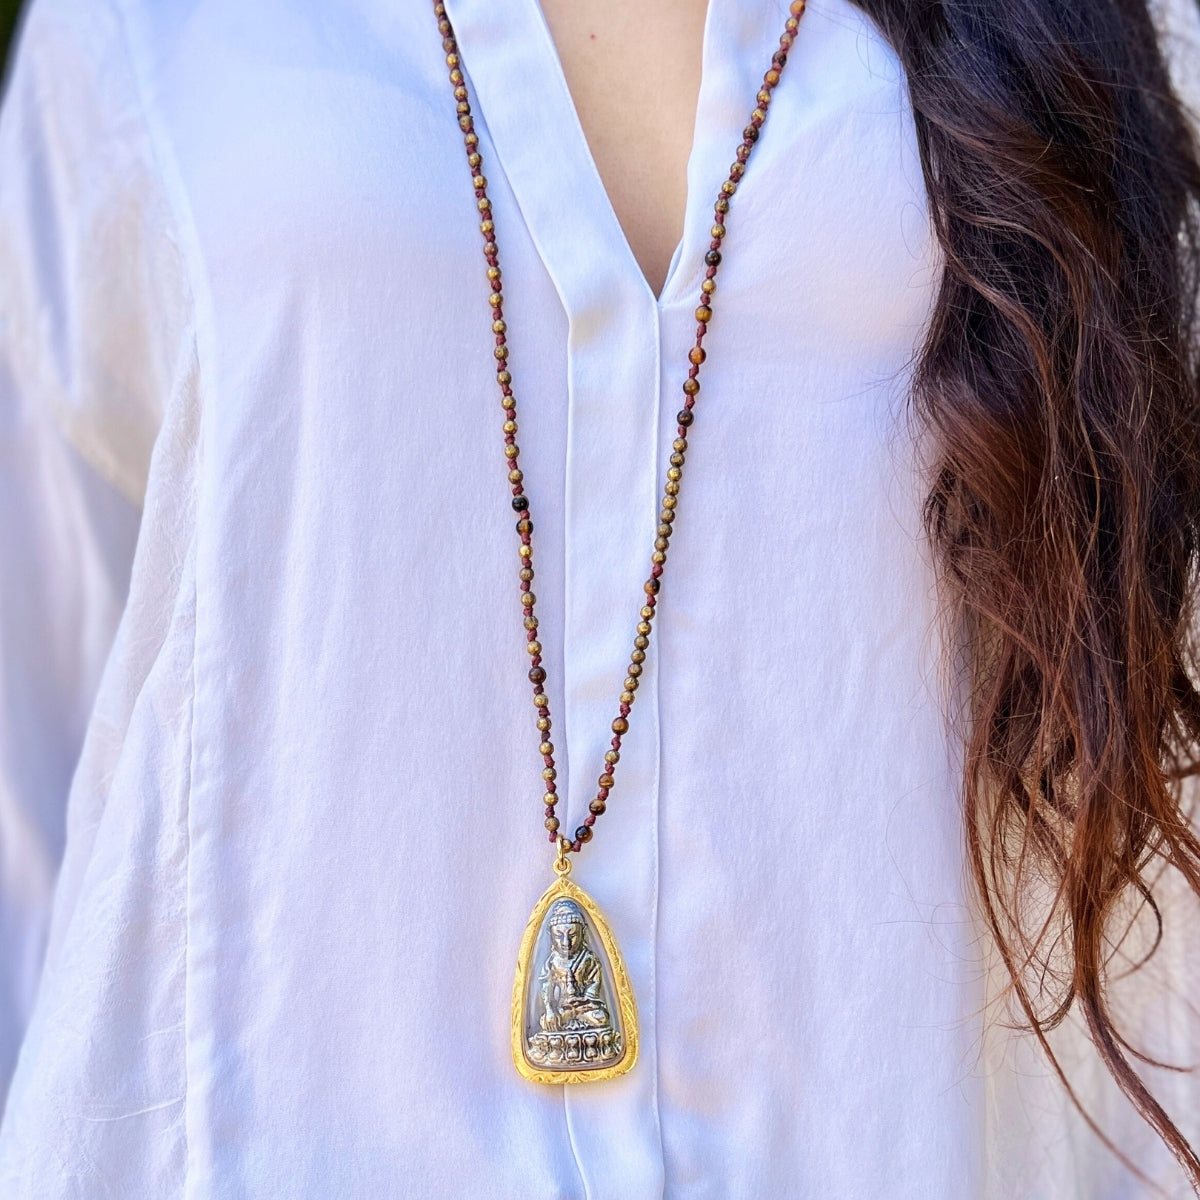 Spirit Whisperer Talisman Necklace - One of a Kind. ONLY ONE AVAILABLE.